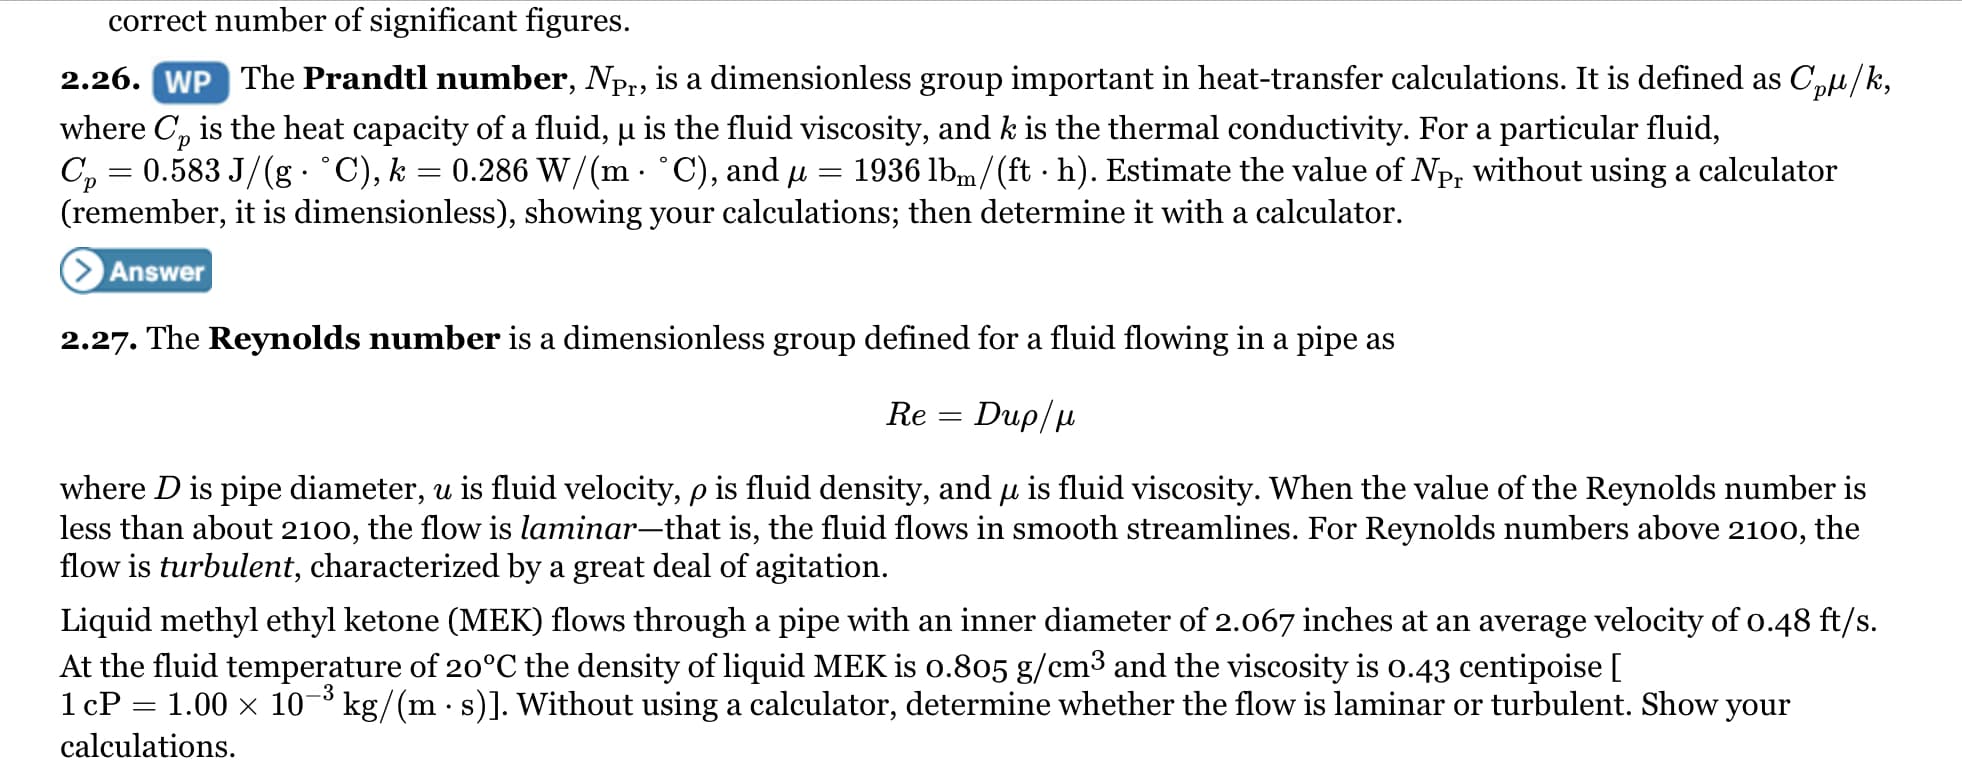 correct number of significant figures.
2.26. WP The Prandtl number, Npr, is a dimensionless group important in heat-transfer calculations. It is defined as C,e/k,
where C, is the heat capacity of a fluid, µ is the fluid viscosity, and k is the thermal conductivity. For a particular fluid,
C, = 0.583 J/(g : °C), k = 0.286 W/(m °C), and u
(remember, it is dimensionless), showing your calculations; then determine it with a calculator.
1936 lbm/(ft · h). Estimate the value of Np, without using a calculator
Answer
2.27. The Reynolds number is a dimensionless group defined for a fluid flowing in a pipe as
Re
Dup/μ
where D is pipe diameter, u is fluid velocity, p is fluid density, and u is fluid viscosity. When the value of the Reynolds number is
less than about 2100, the flow is laminar-that is, the fluid flows in smooth streamlines. For Reynolds numbers above 2100, the
flow is turbulent, characterized by a great deal of agitation.
Liquid methyl ethyl ketone (MEK) flows through a pipe with an inner diameter of 2.067 inches at an average velocity of o.48 ft/s.
At the fluid temperature of 20°C the density of liquid MEK is o.805 g/cm3 and the viscosity is o.43 centipoise [
1 cP = 1.00 x 10¬³ kg/(m · s)]. Without using a calculator, determine whether the flow is laminar or turbulent. Show your
-3
calculations.
